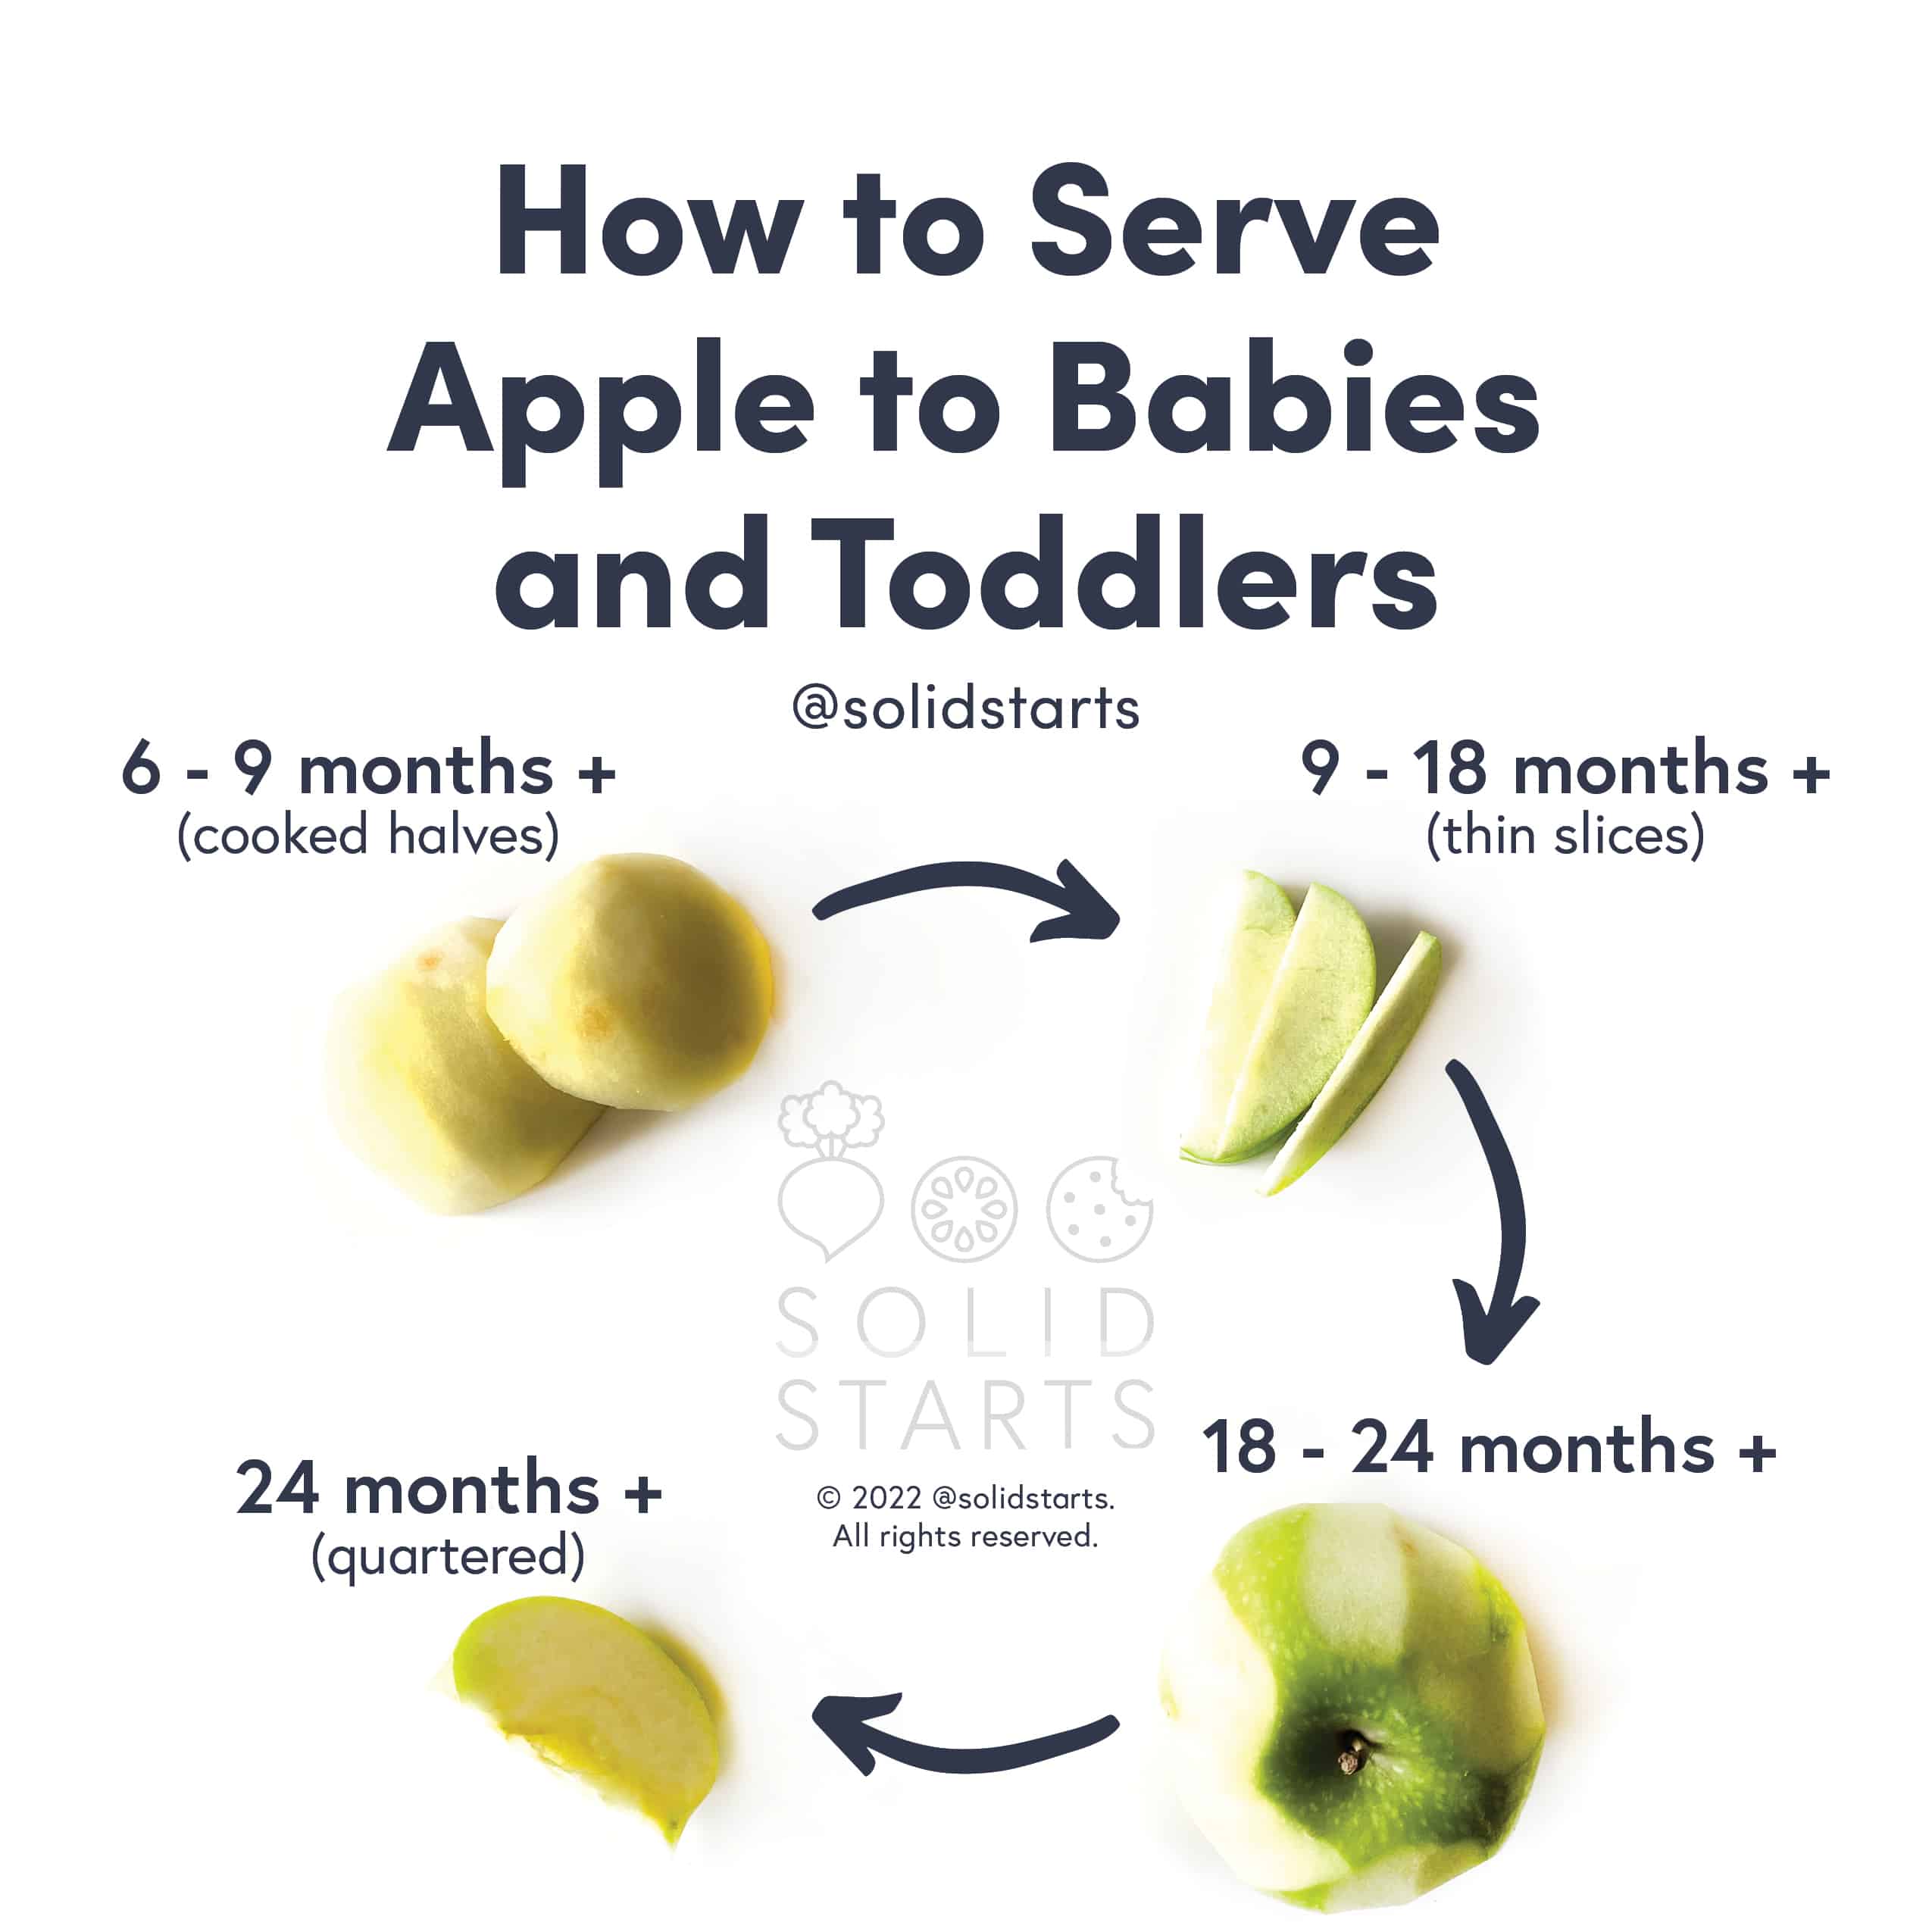 How to Serve Apple to Babies and Toddlers v2